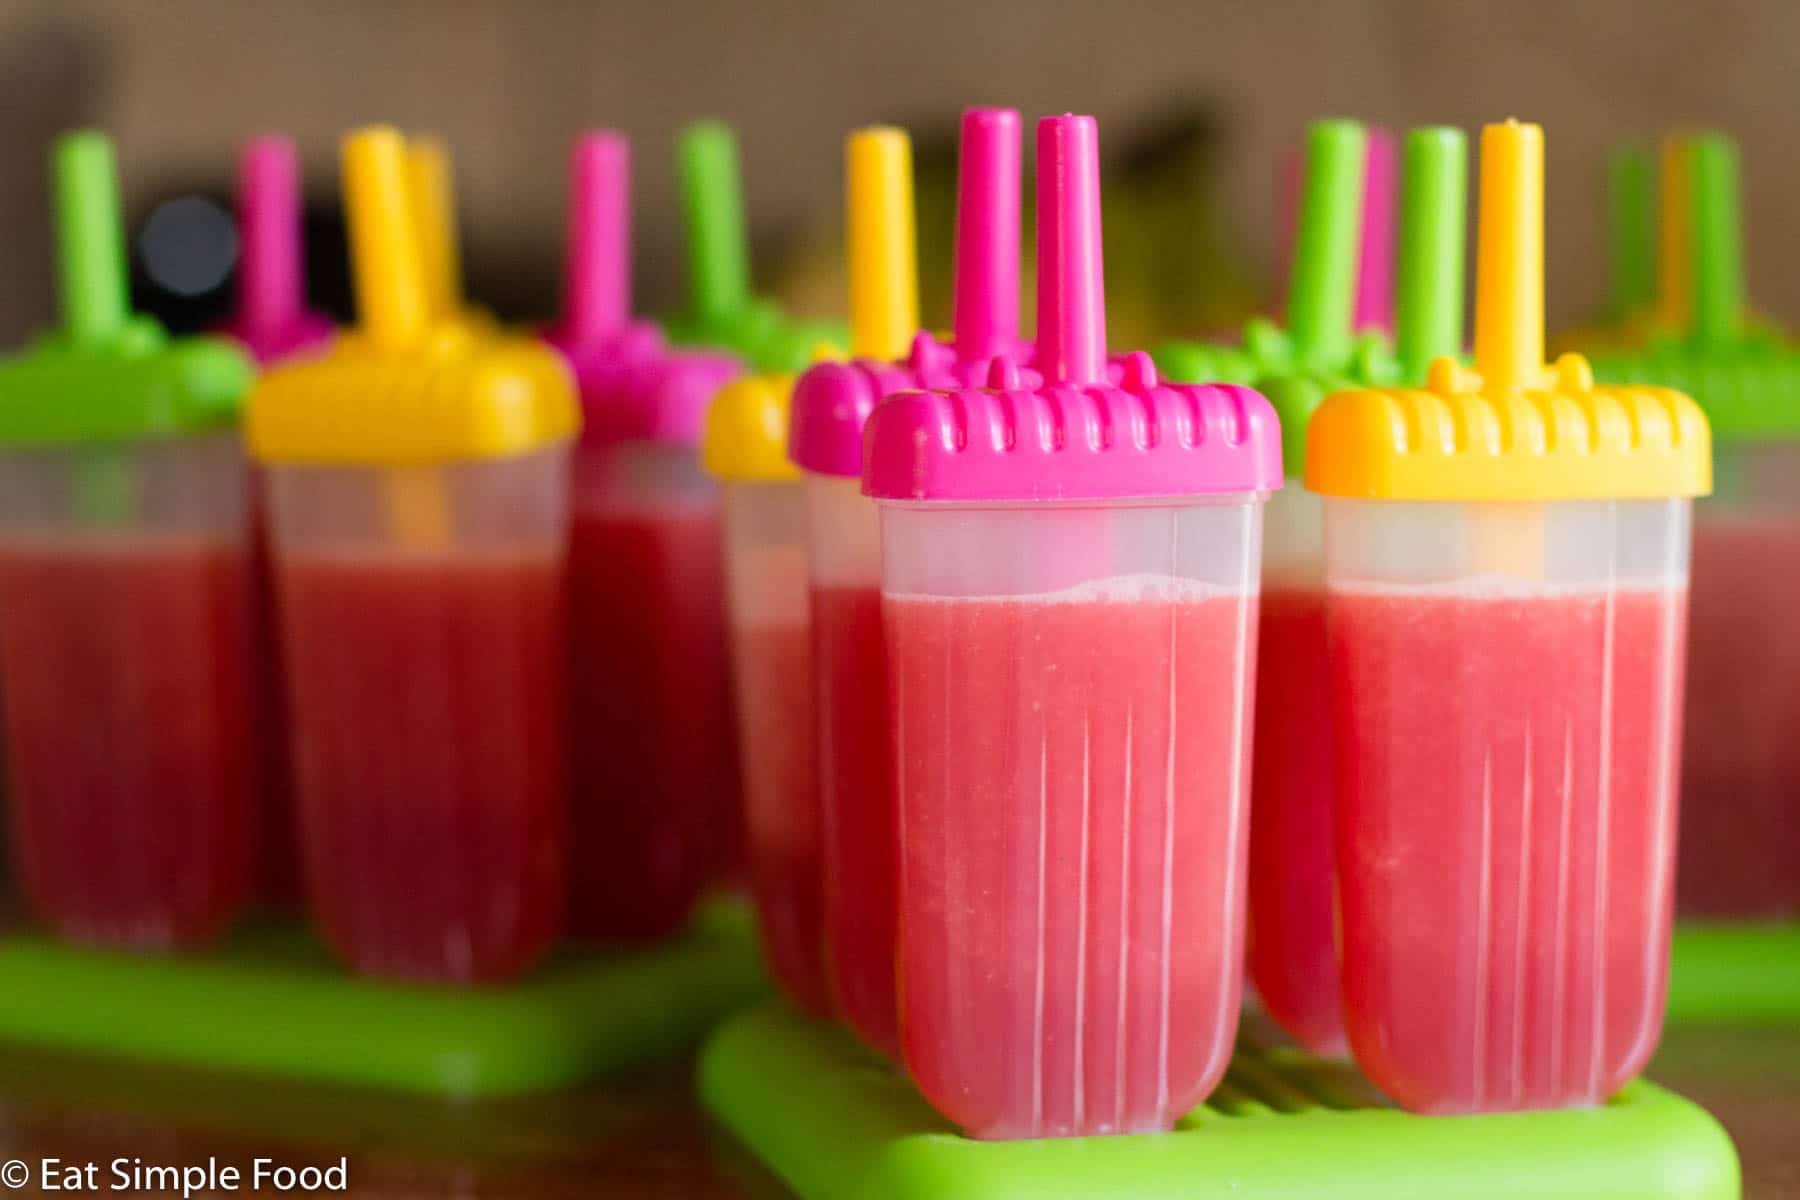 Pink Watermelon Popsicles in plastic molds with coloful tops. Around 14 popsicles.